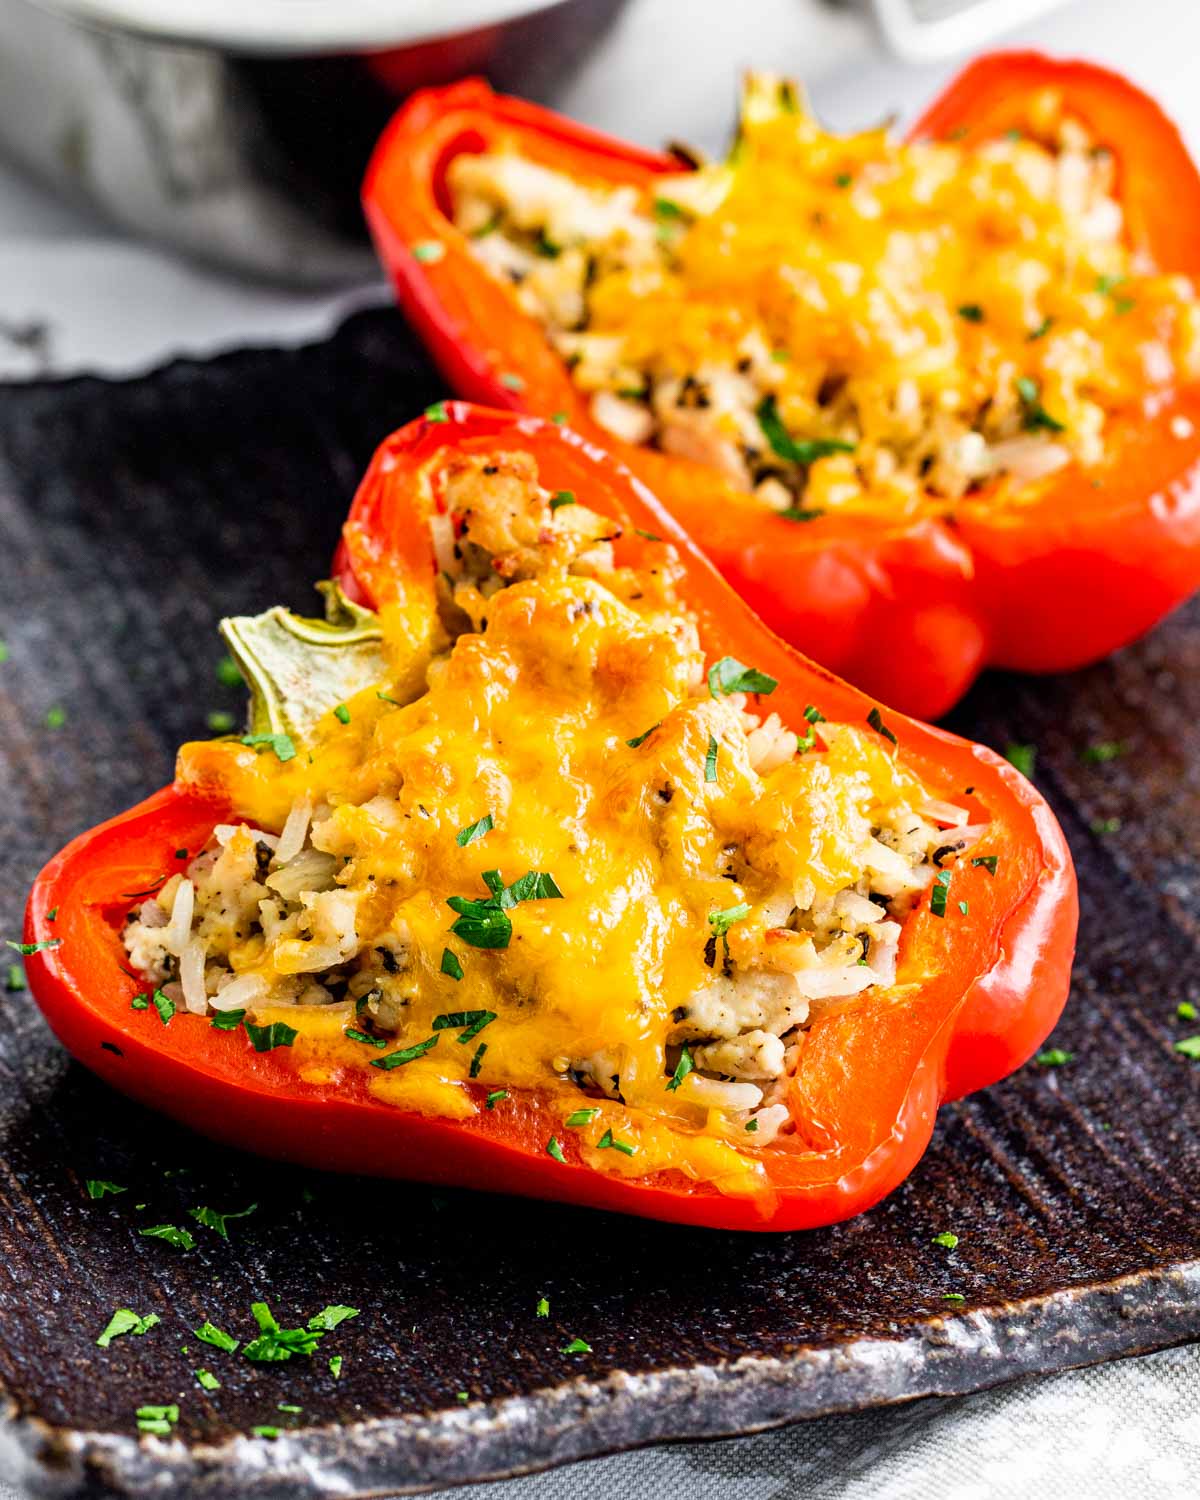 sideview shot of 2 stuffed pepper halves on a black plate topped with a bit of cheddar cheese and garnished with fresh parsley